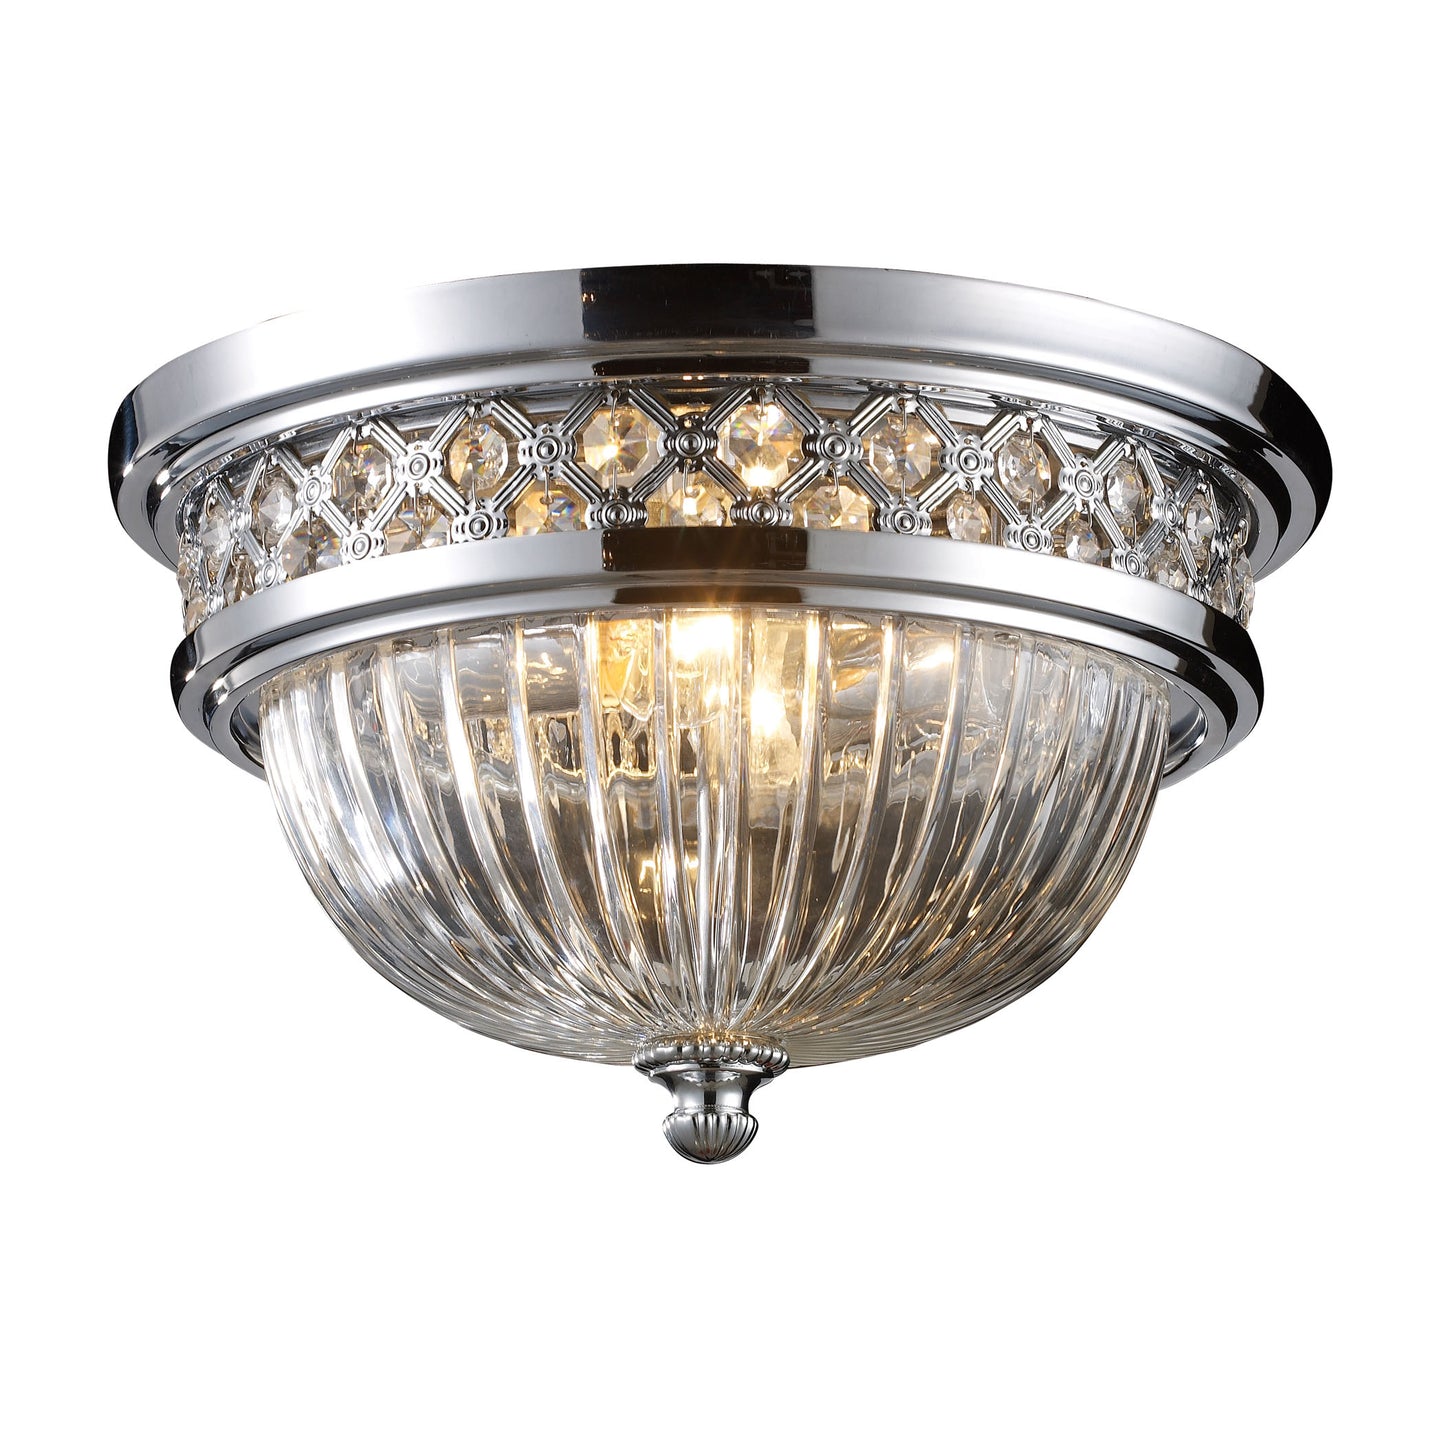 ELK Lighting 11225/2 - Flushmounts 13" Wide 2-Light Flush Mount in Polished Chrome with Glass and Cr